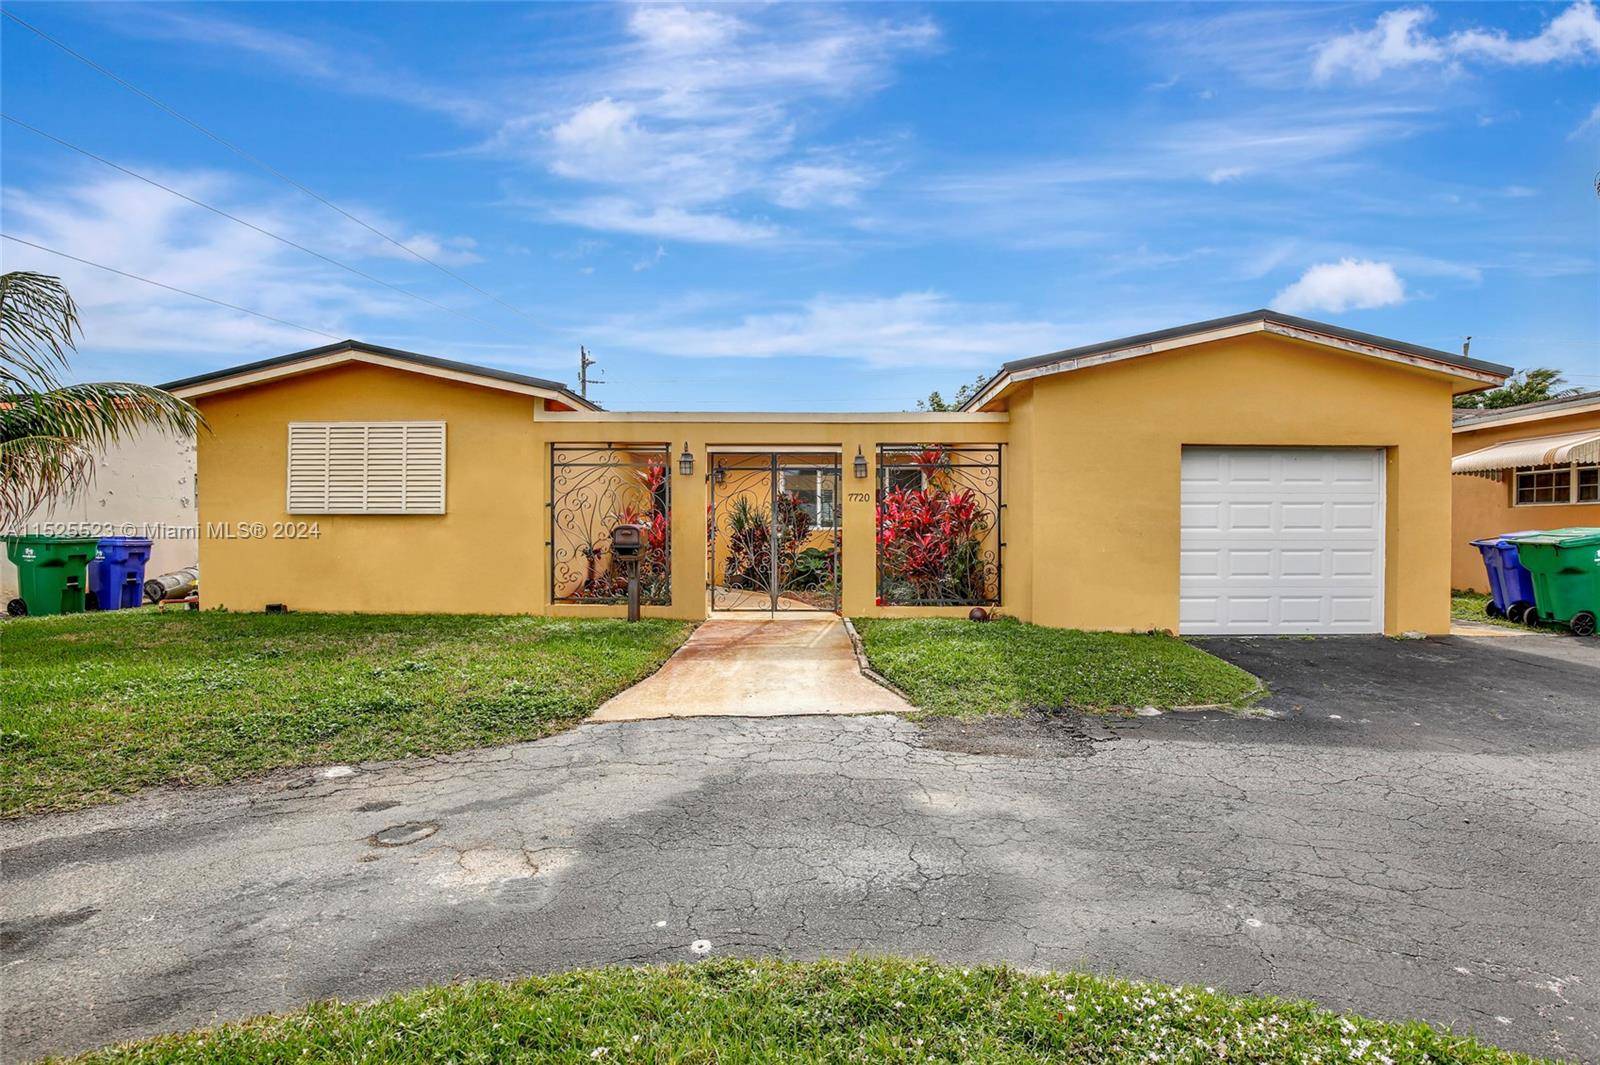 Charming 3BR 2BA single family home for rent in Miramar, FL.